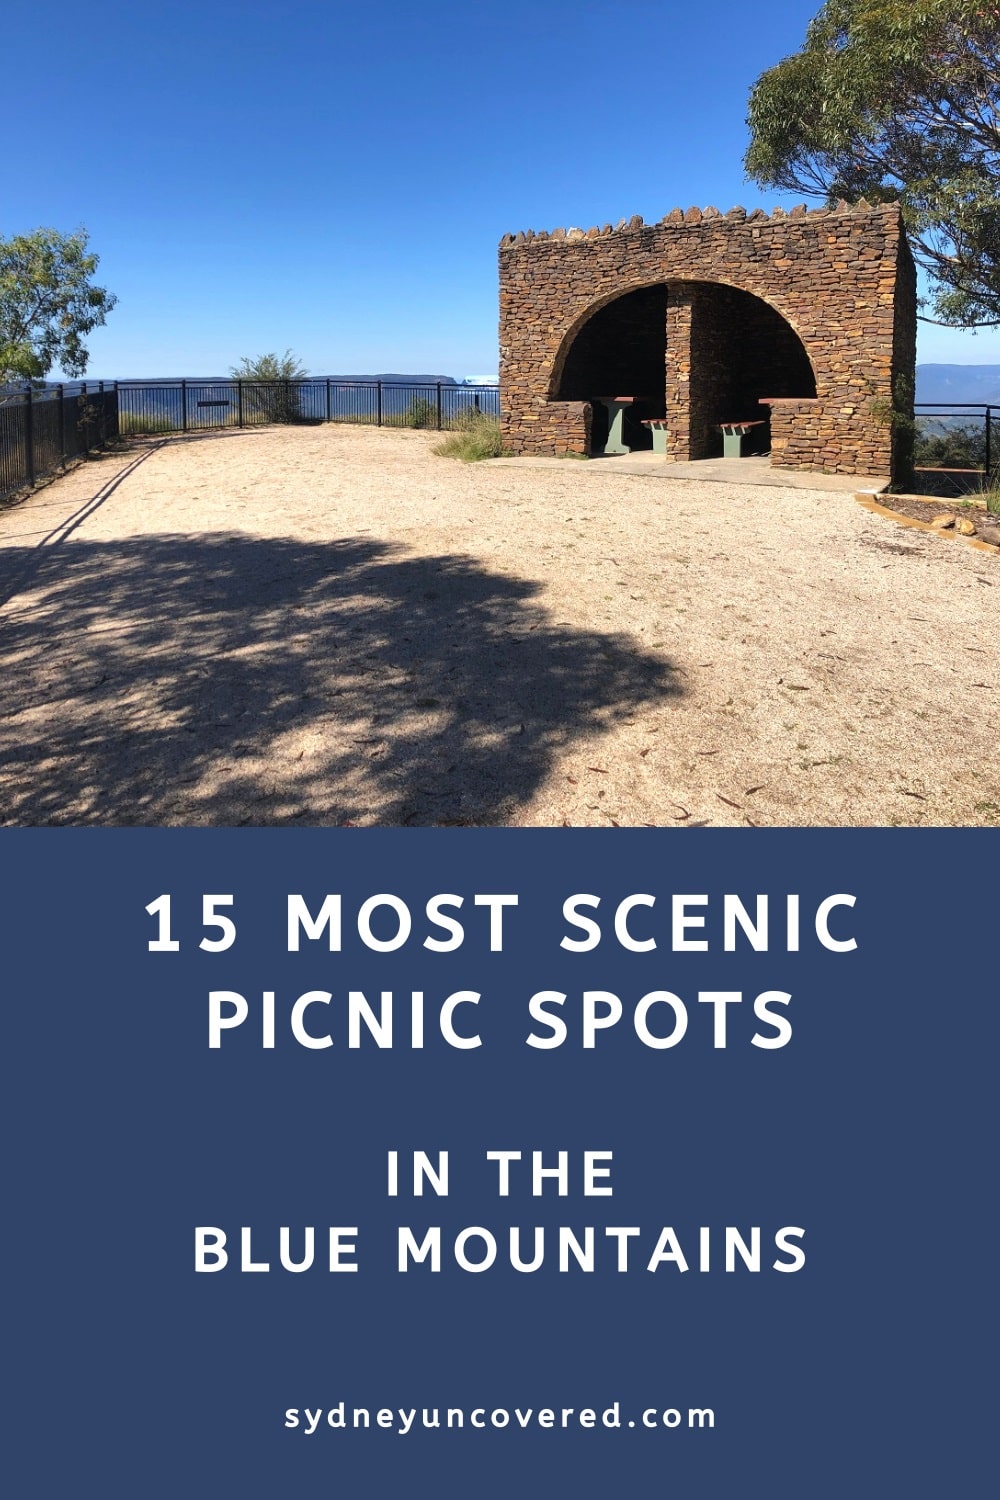 Scenic picnic spots in the Blue Mountains